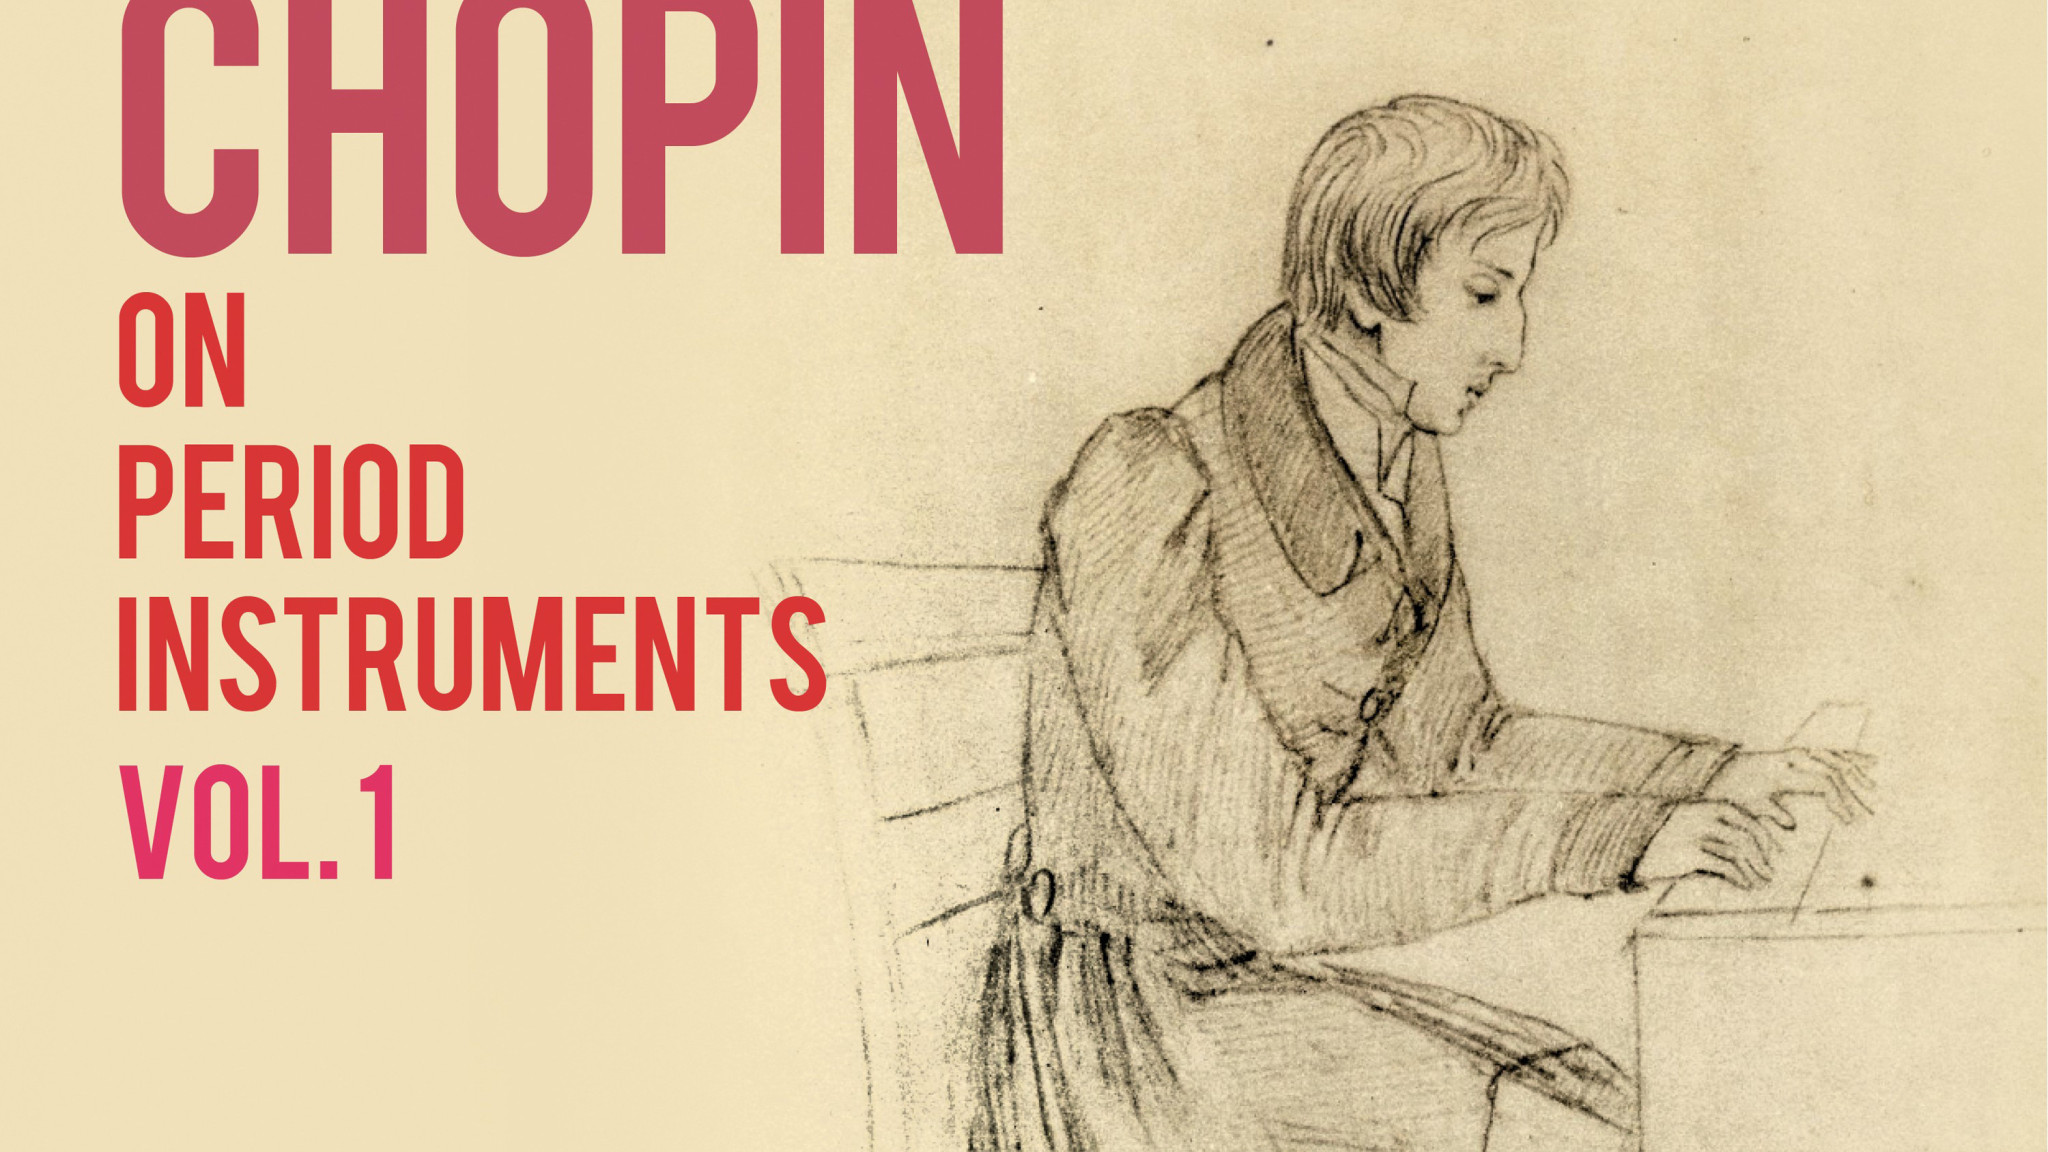 Chopin on period instruments